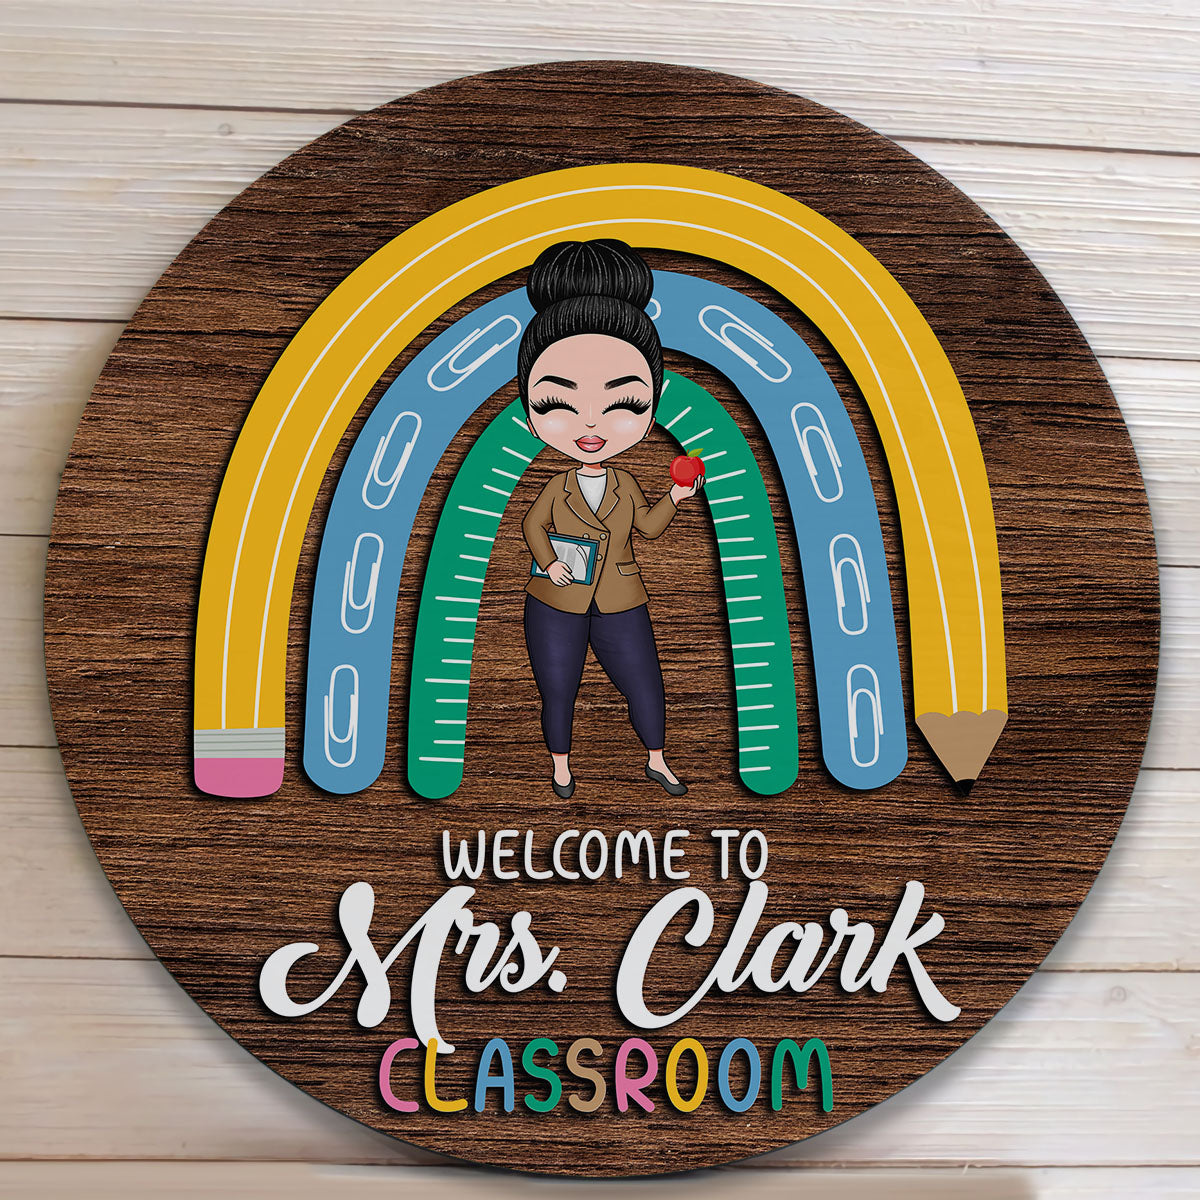 Welcome To My Classroom - Personalized Wood Sign - Decoration Gift For Teachers, Classroom